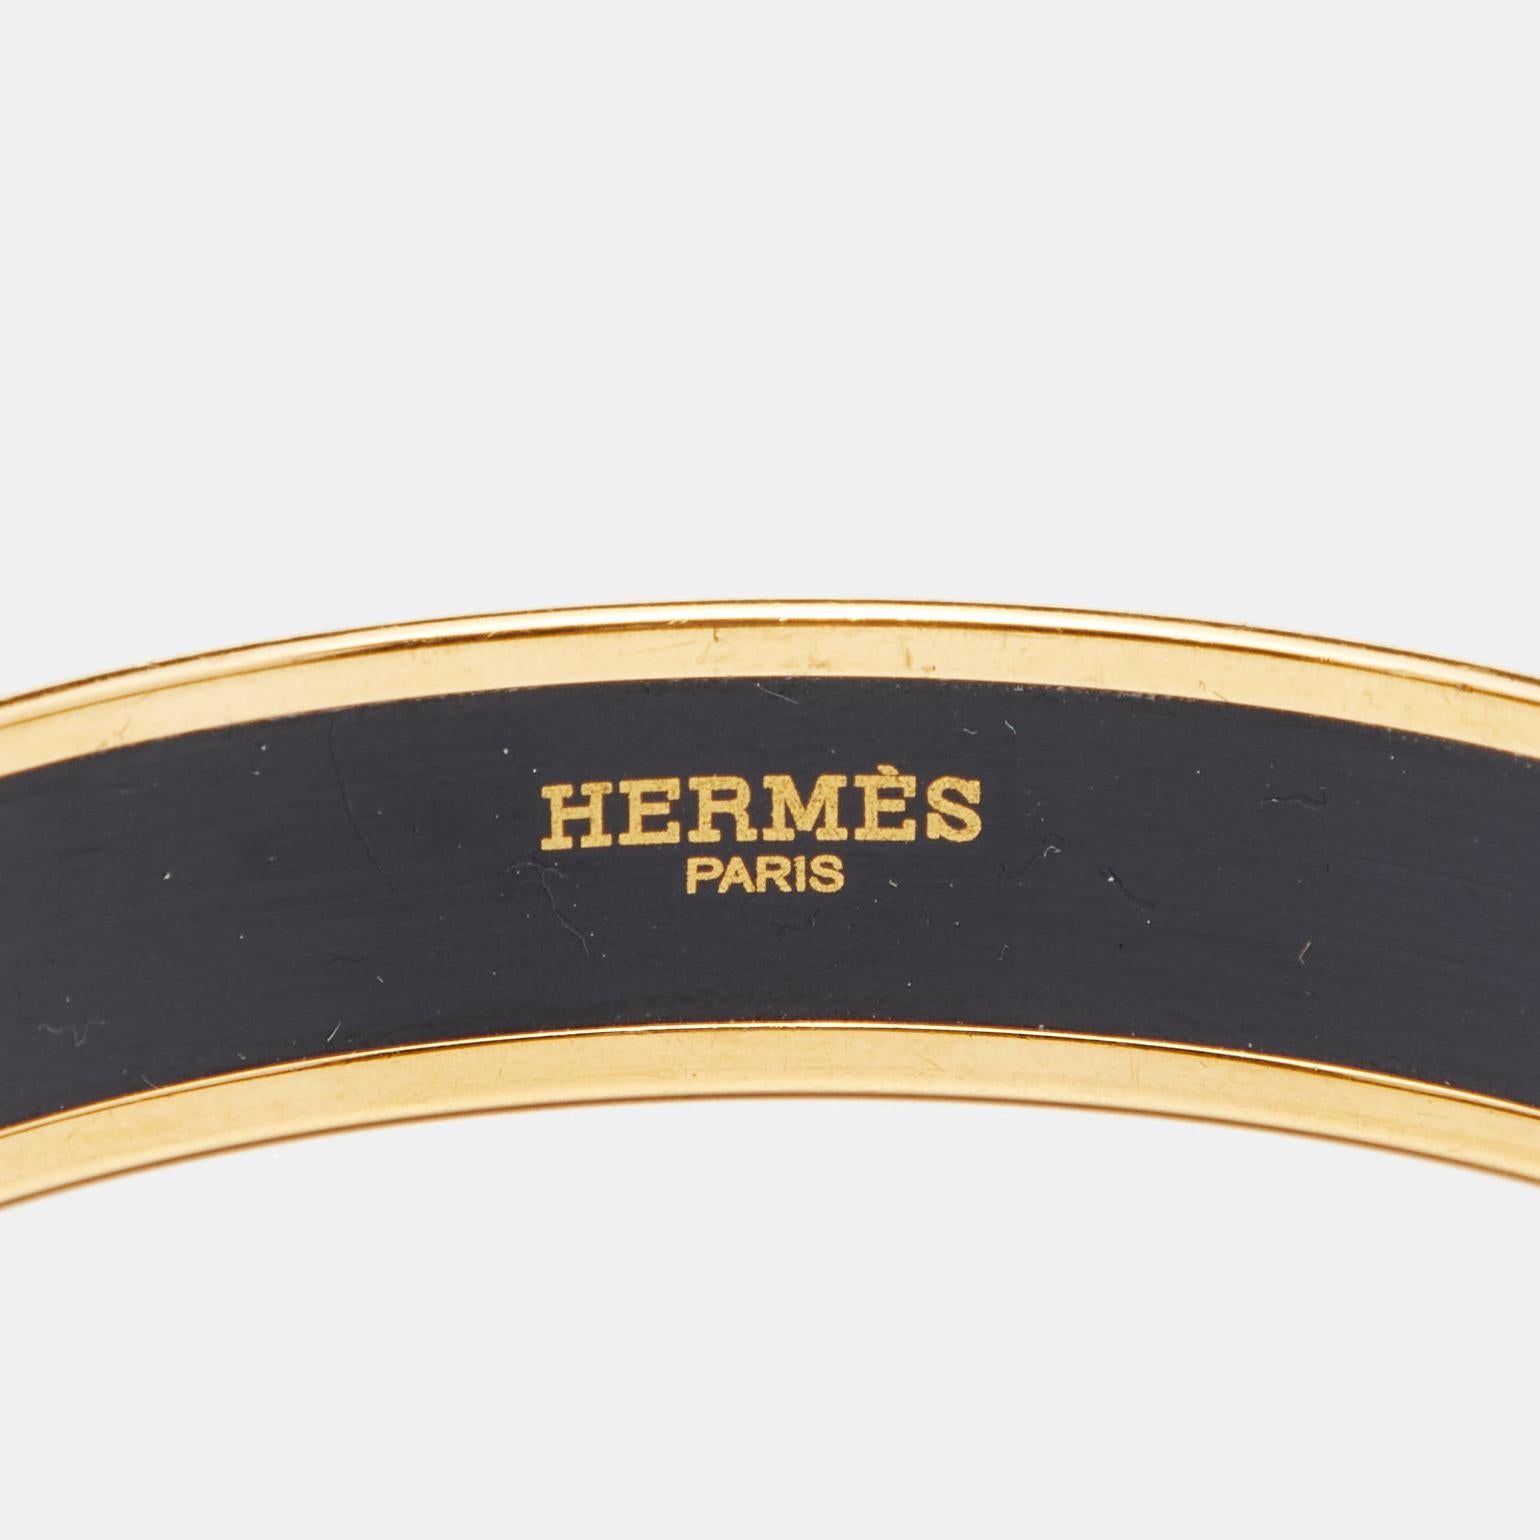 A classic Hermes bangle bracelet is so simple, effortless and yet so chic and luxurious that it is worn over and over again once purchased. It never goes out of style. Constructed using gold plated metal, this bangle is beautified with red enamel